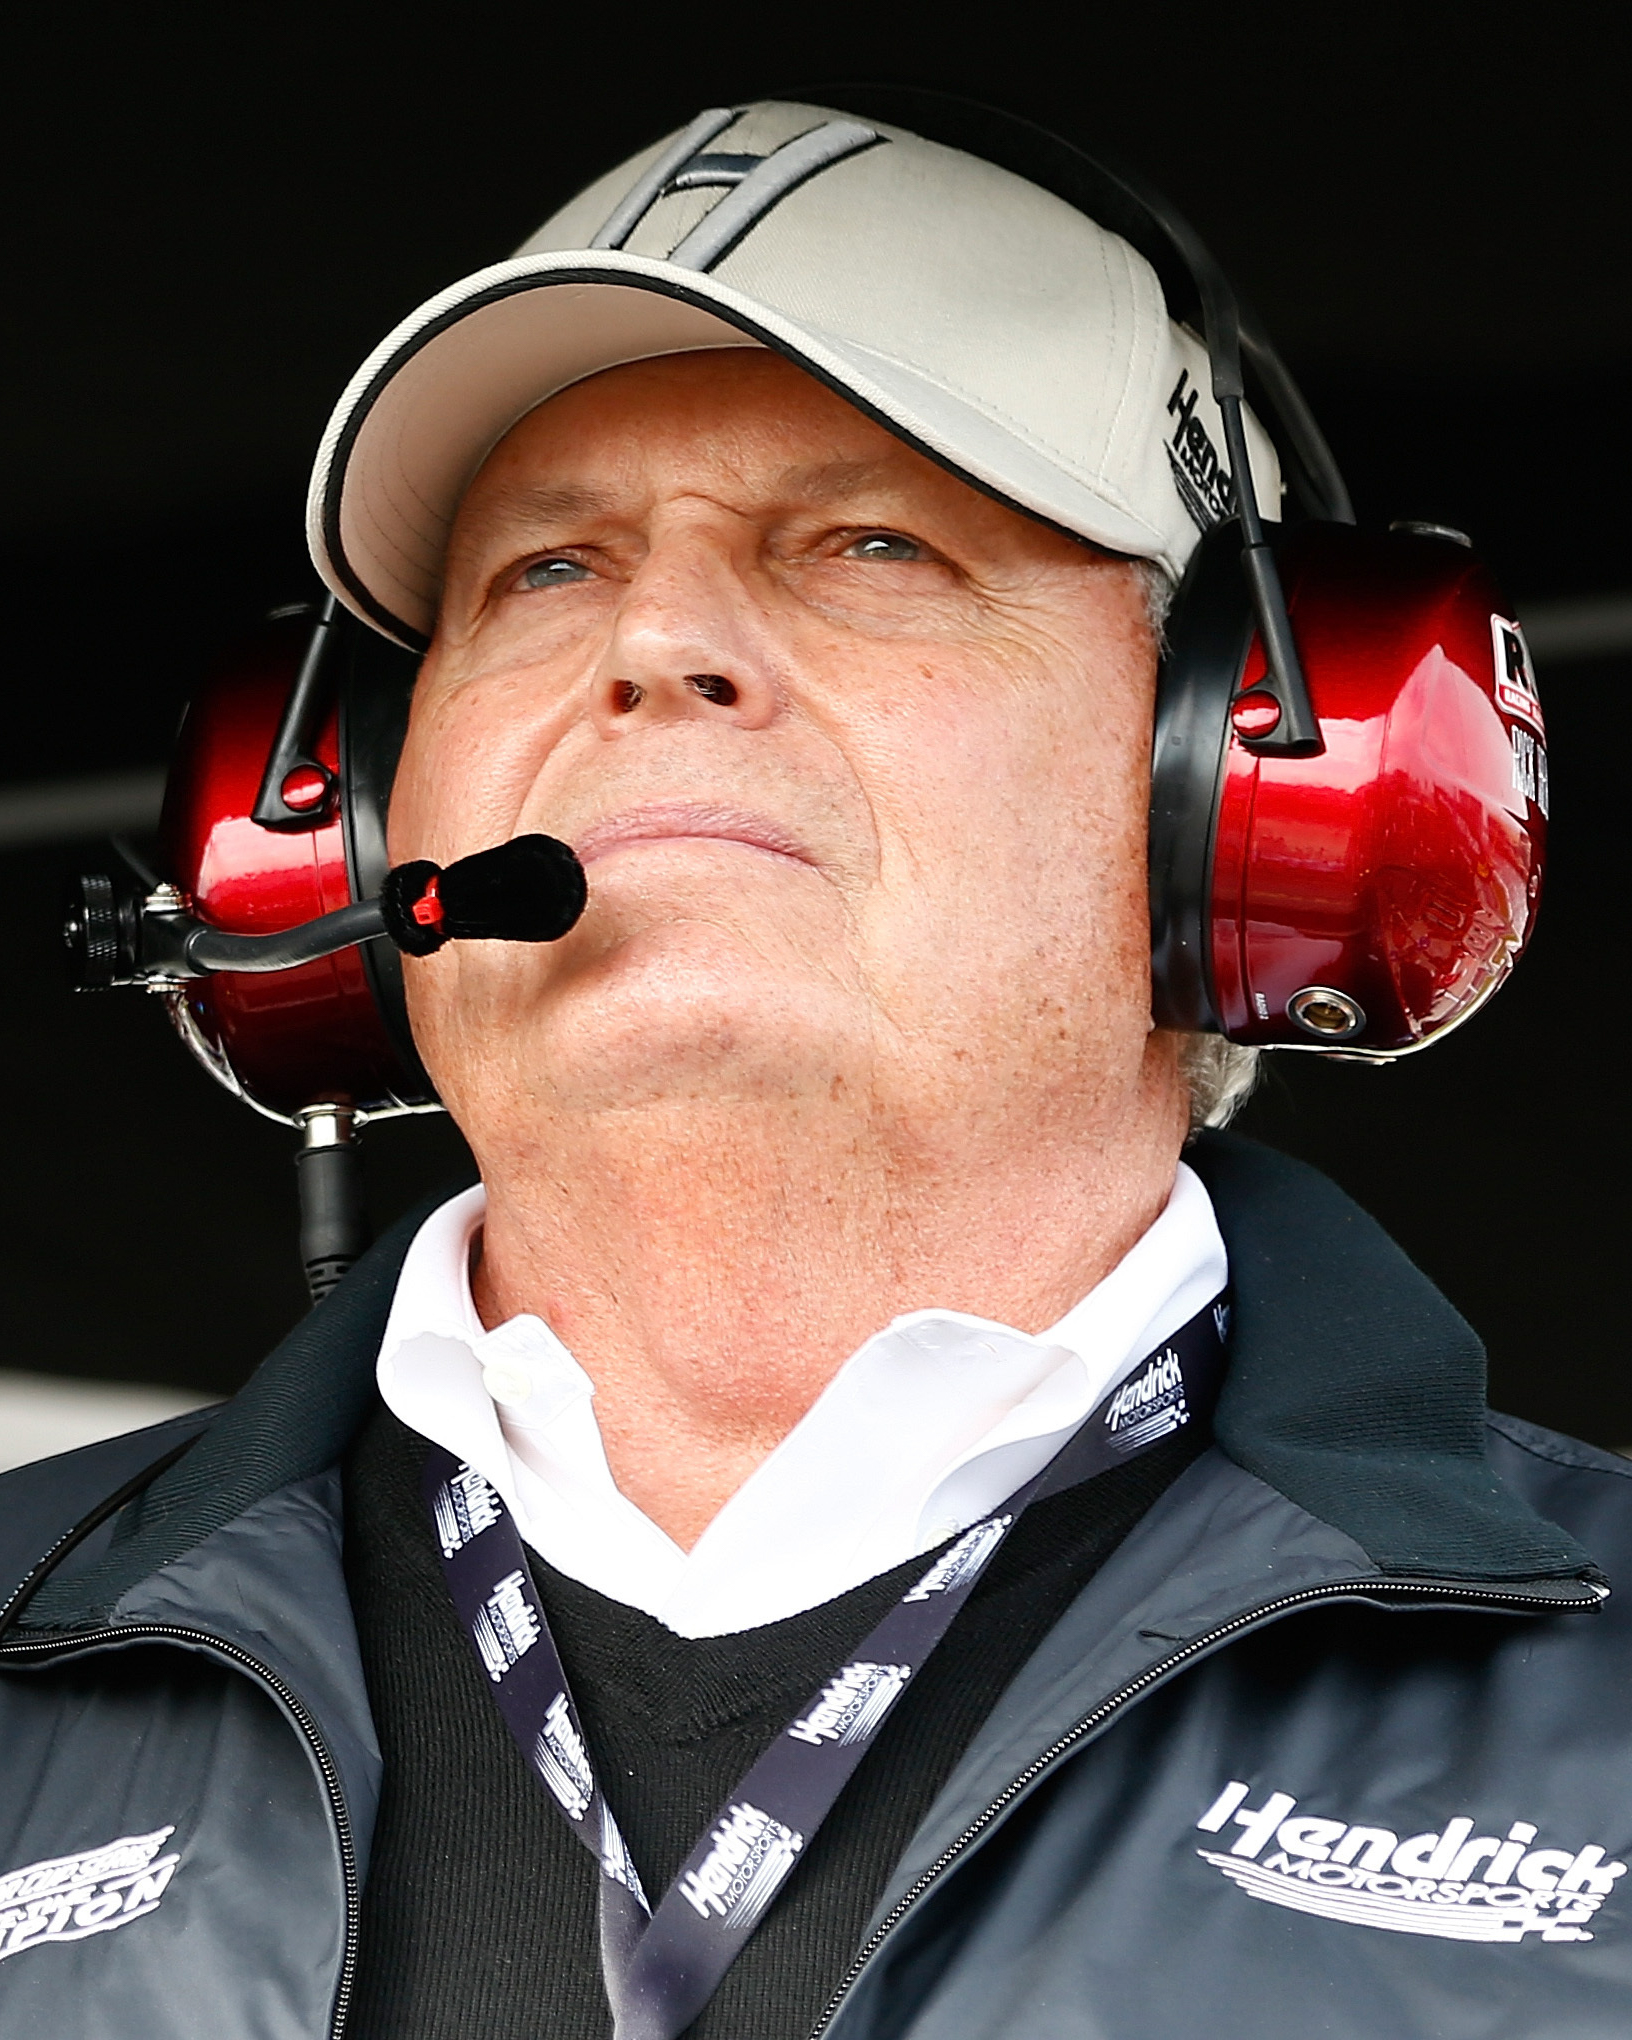  To Mr. H! Remessage to wish inductee Rick Hendrick a very happy birthday! 